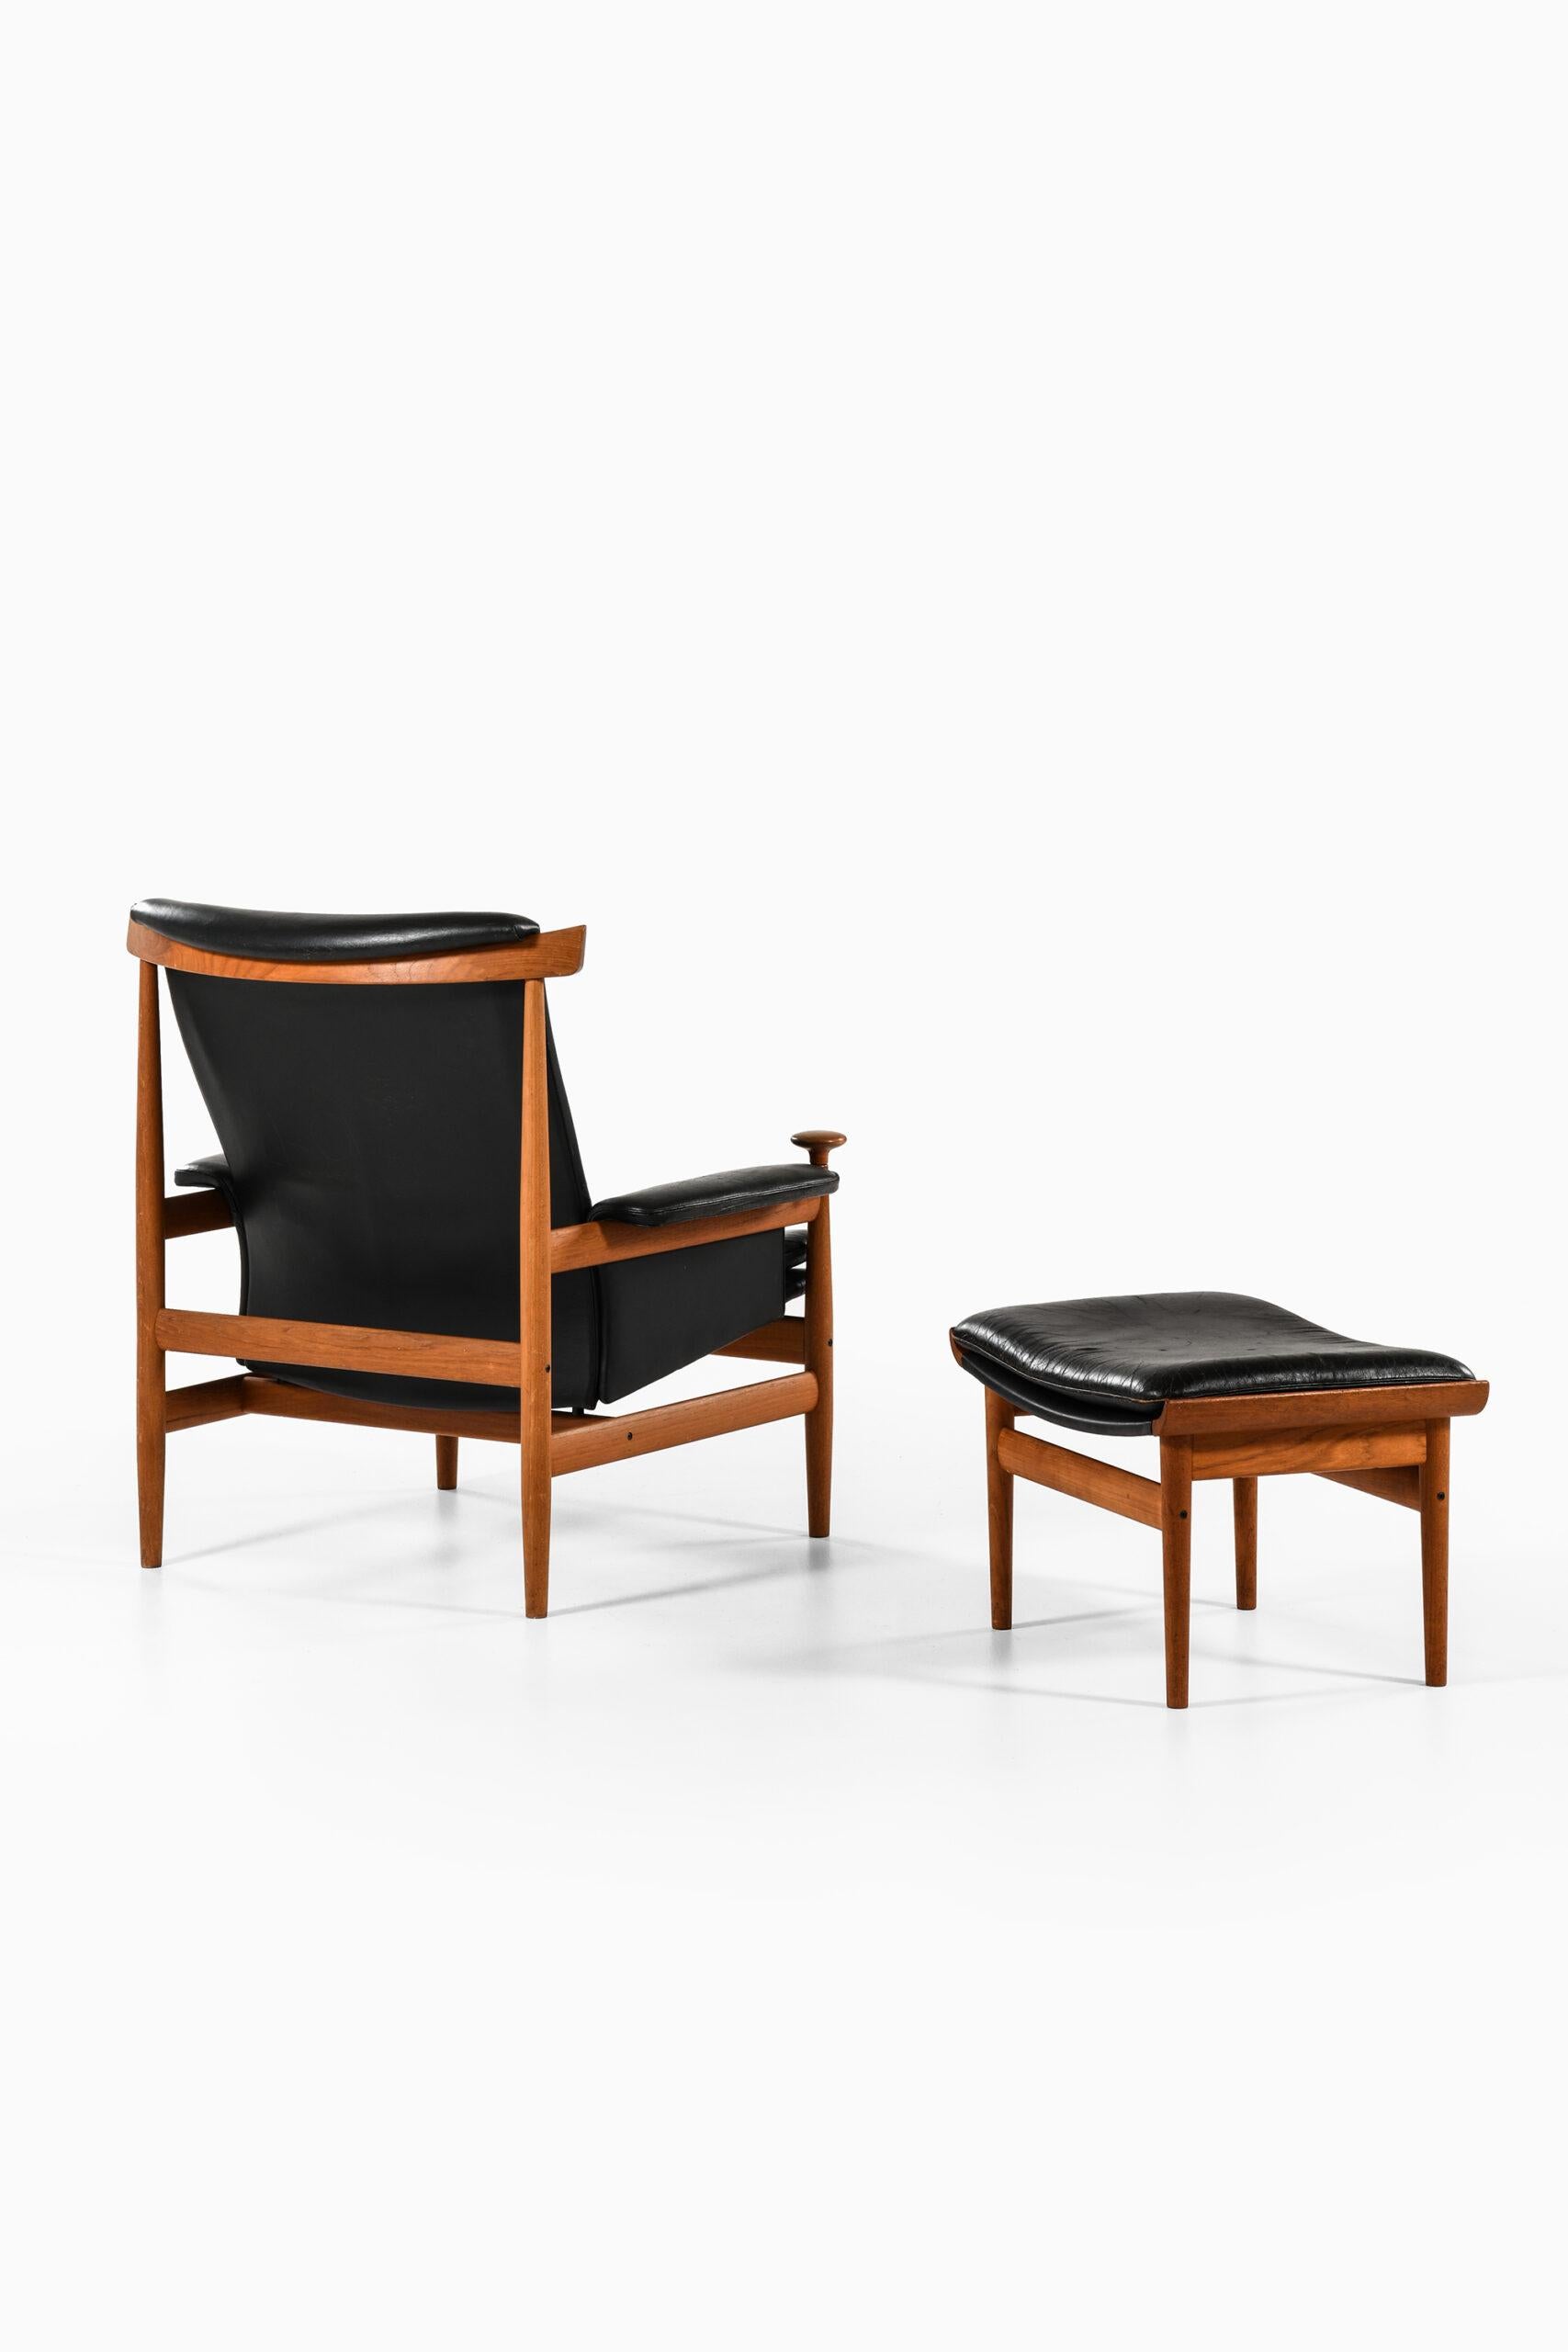 Leather Finn Juhl Easy Chair with Stool Model Bwana Produced by France & Daverkosen For Sale